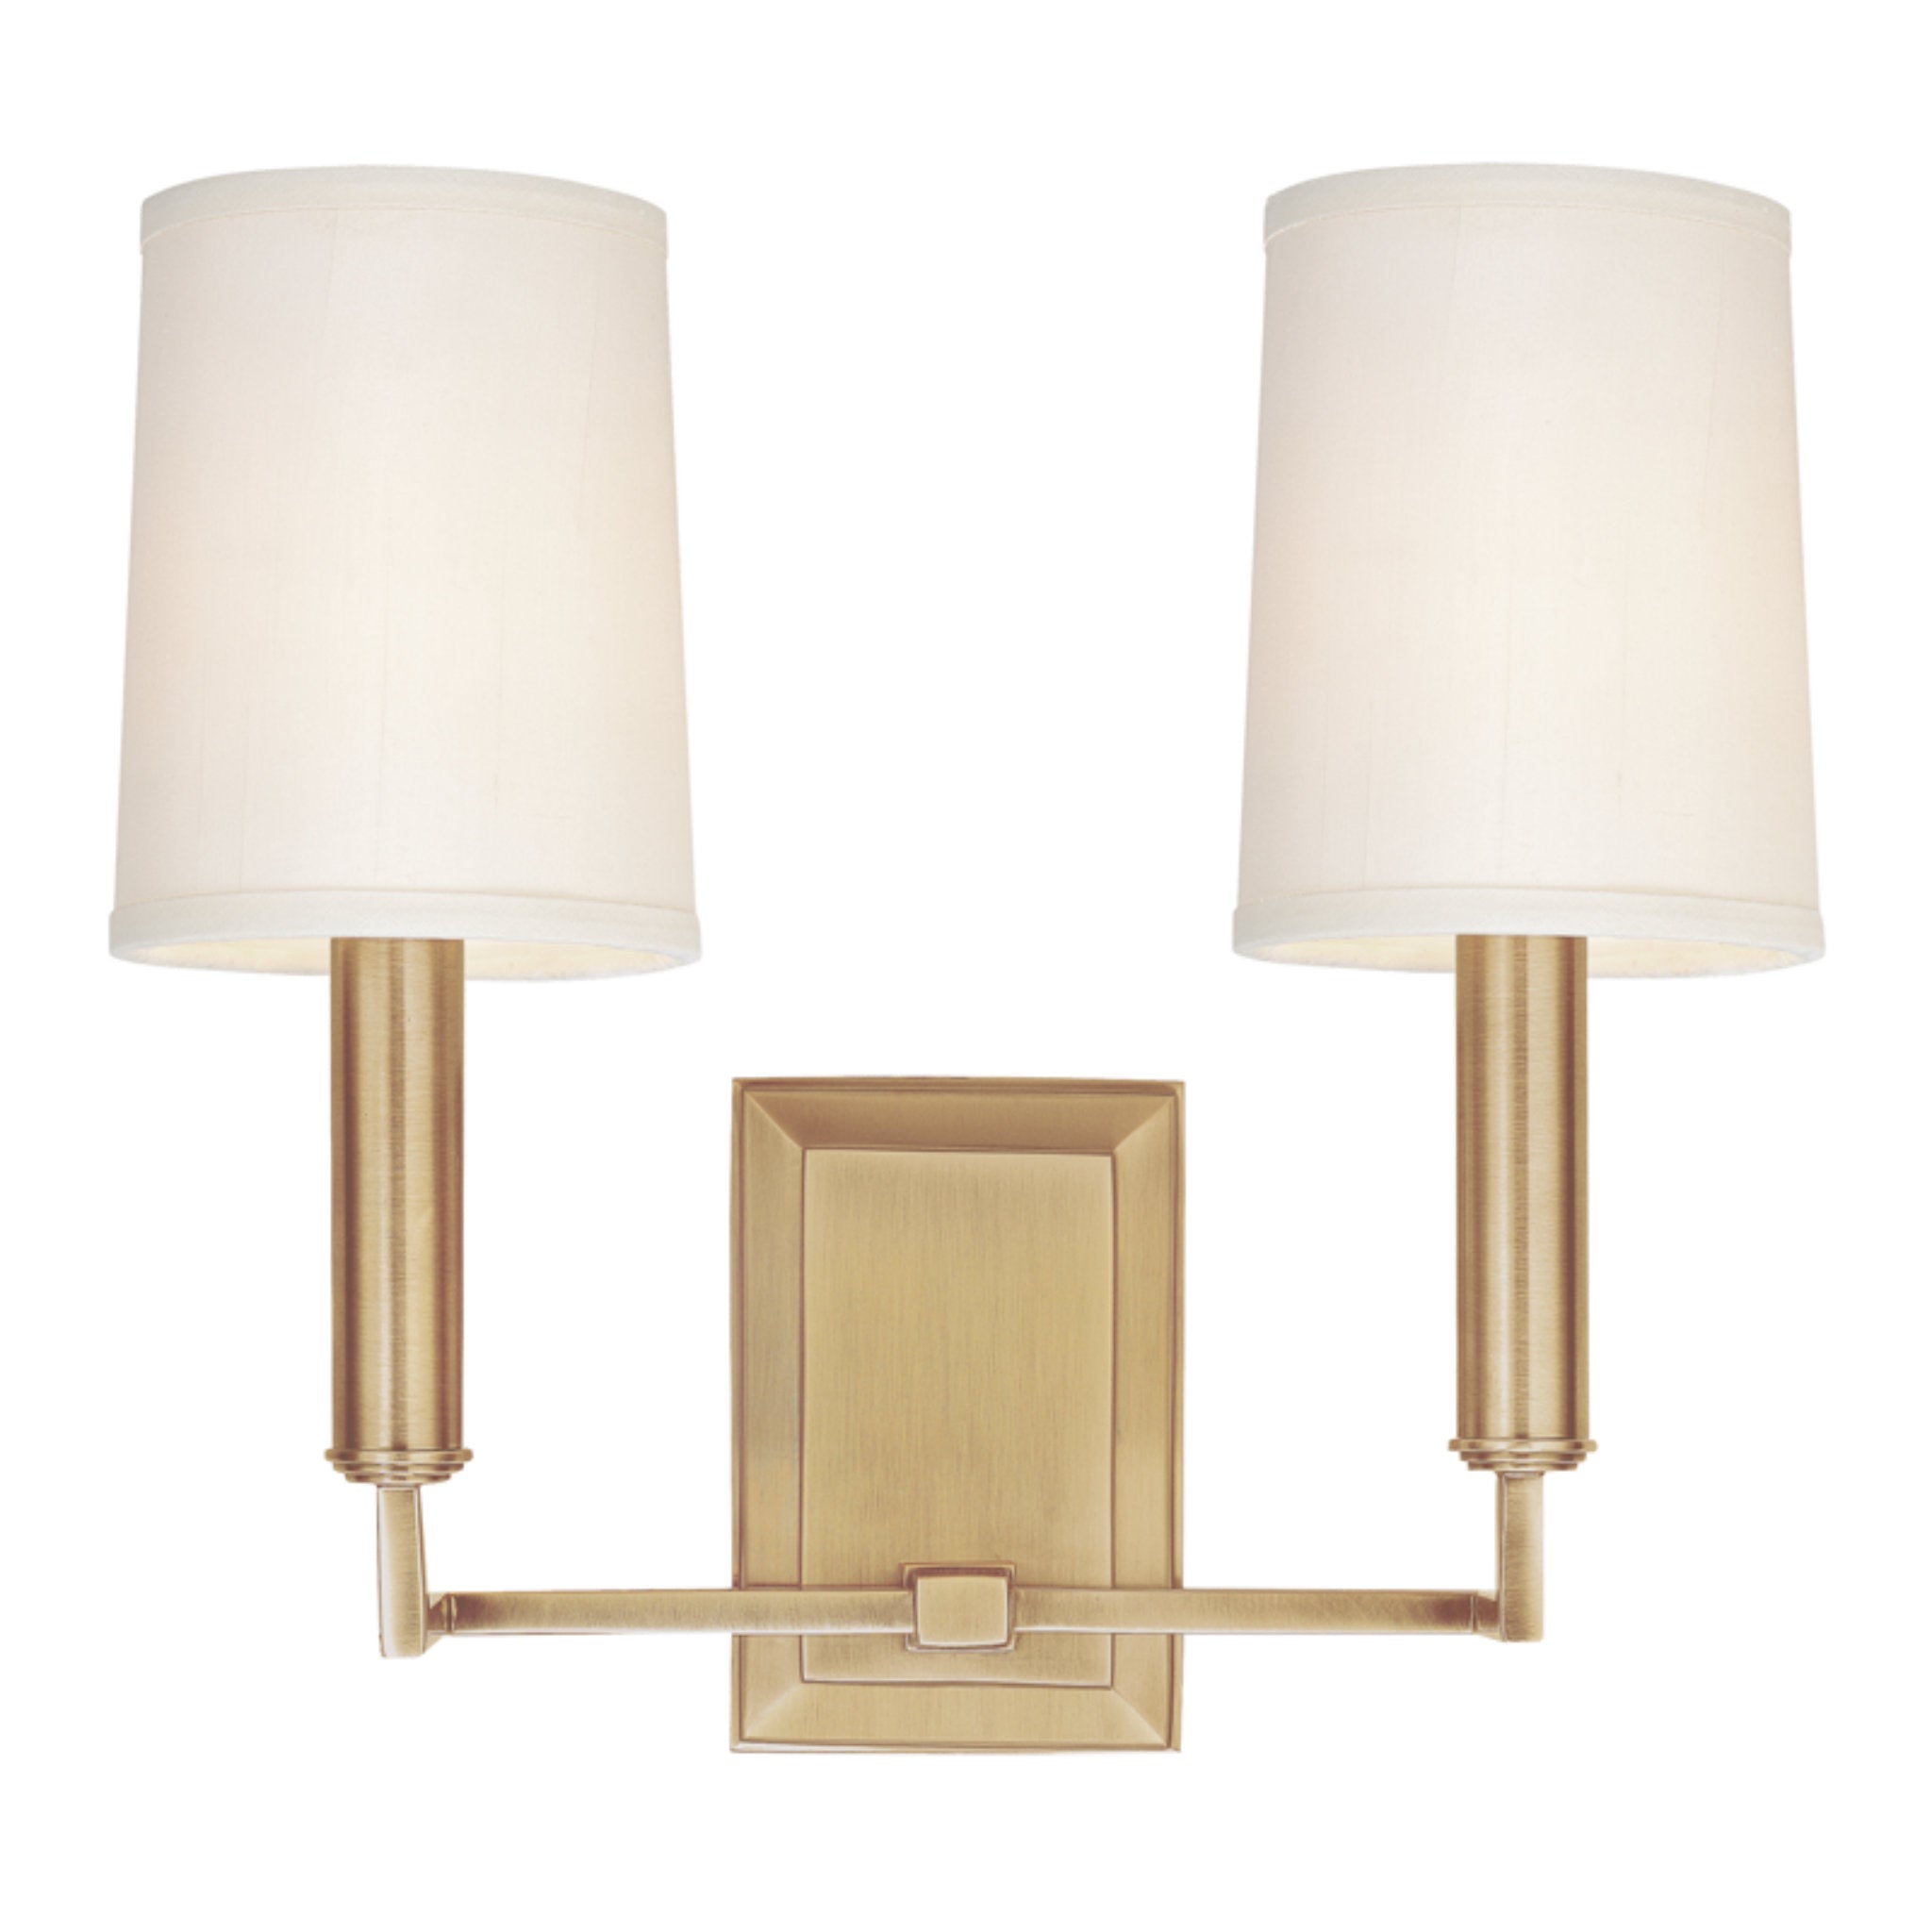 Clinton 2 Light Wall Sconce in Aged Brass